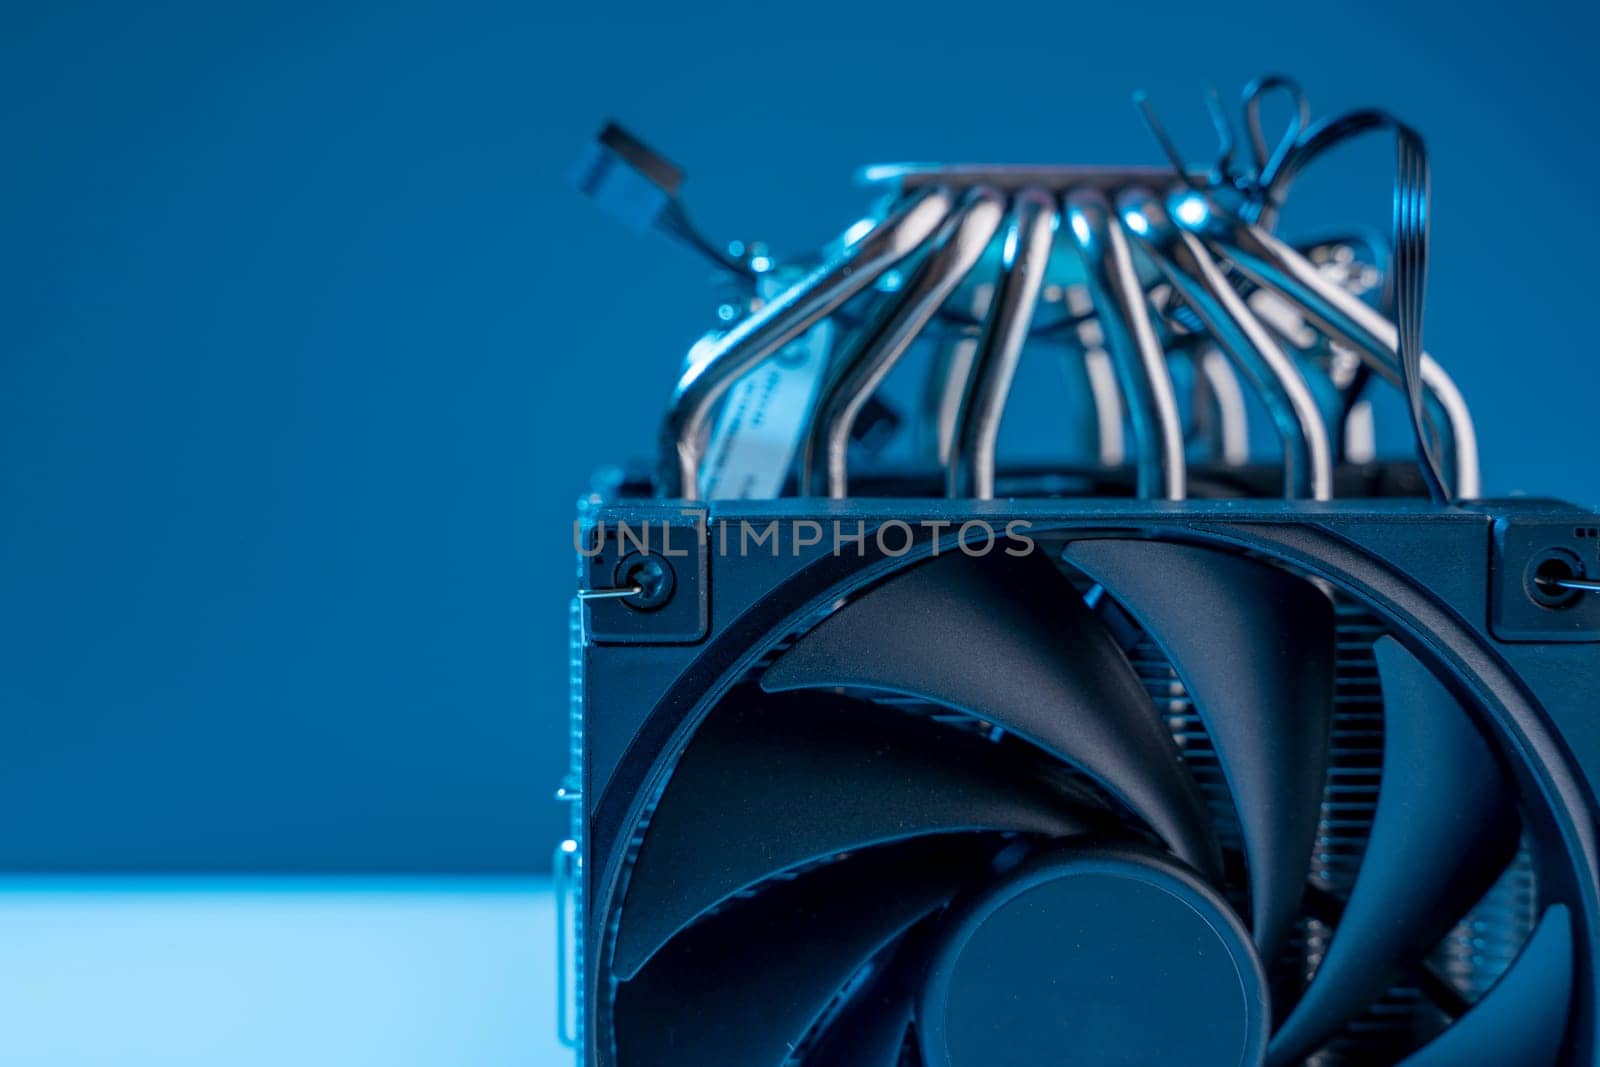 Computer fan. modern powerful cooler for cooling the CPU by audiznam2609